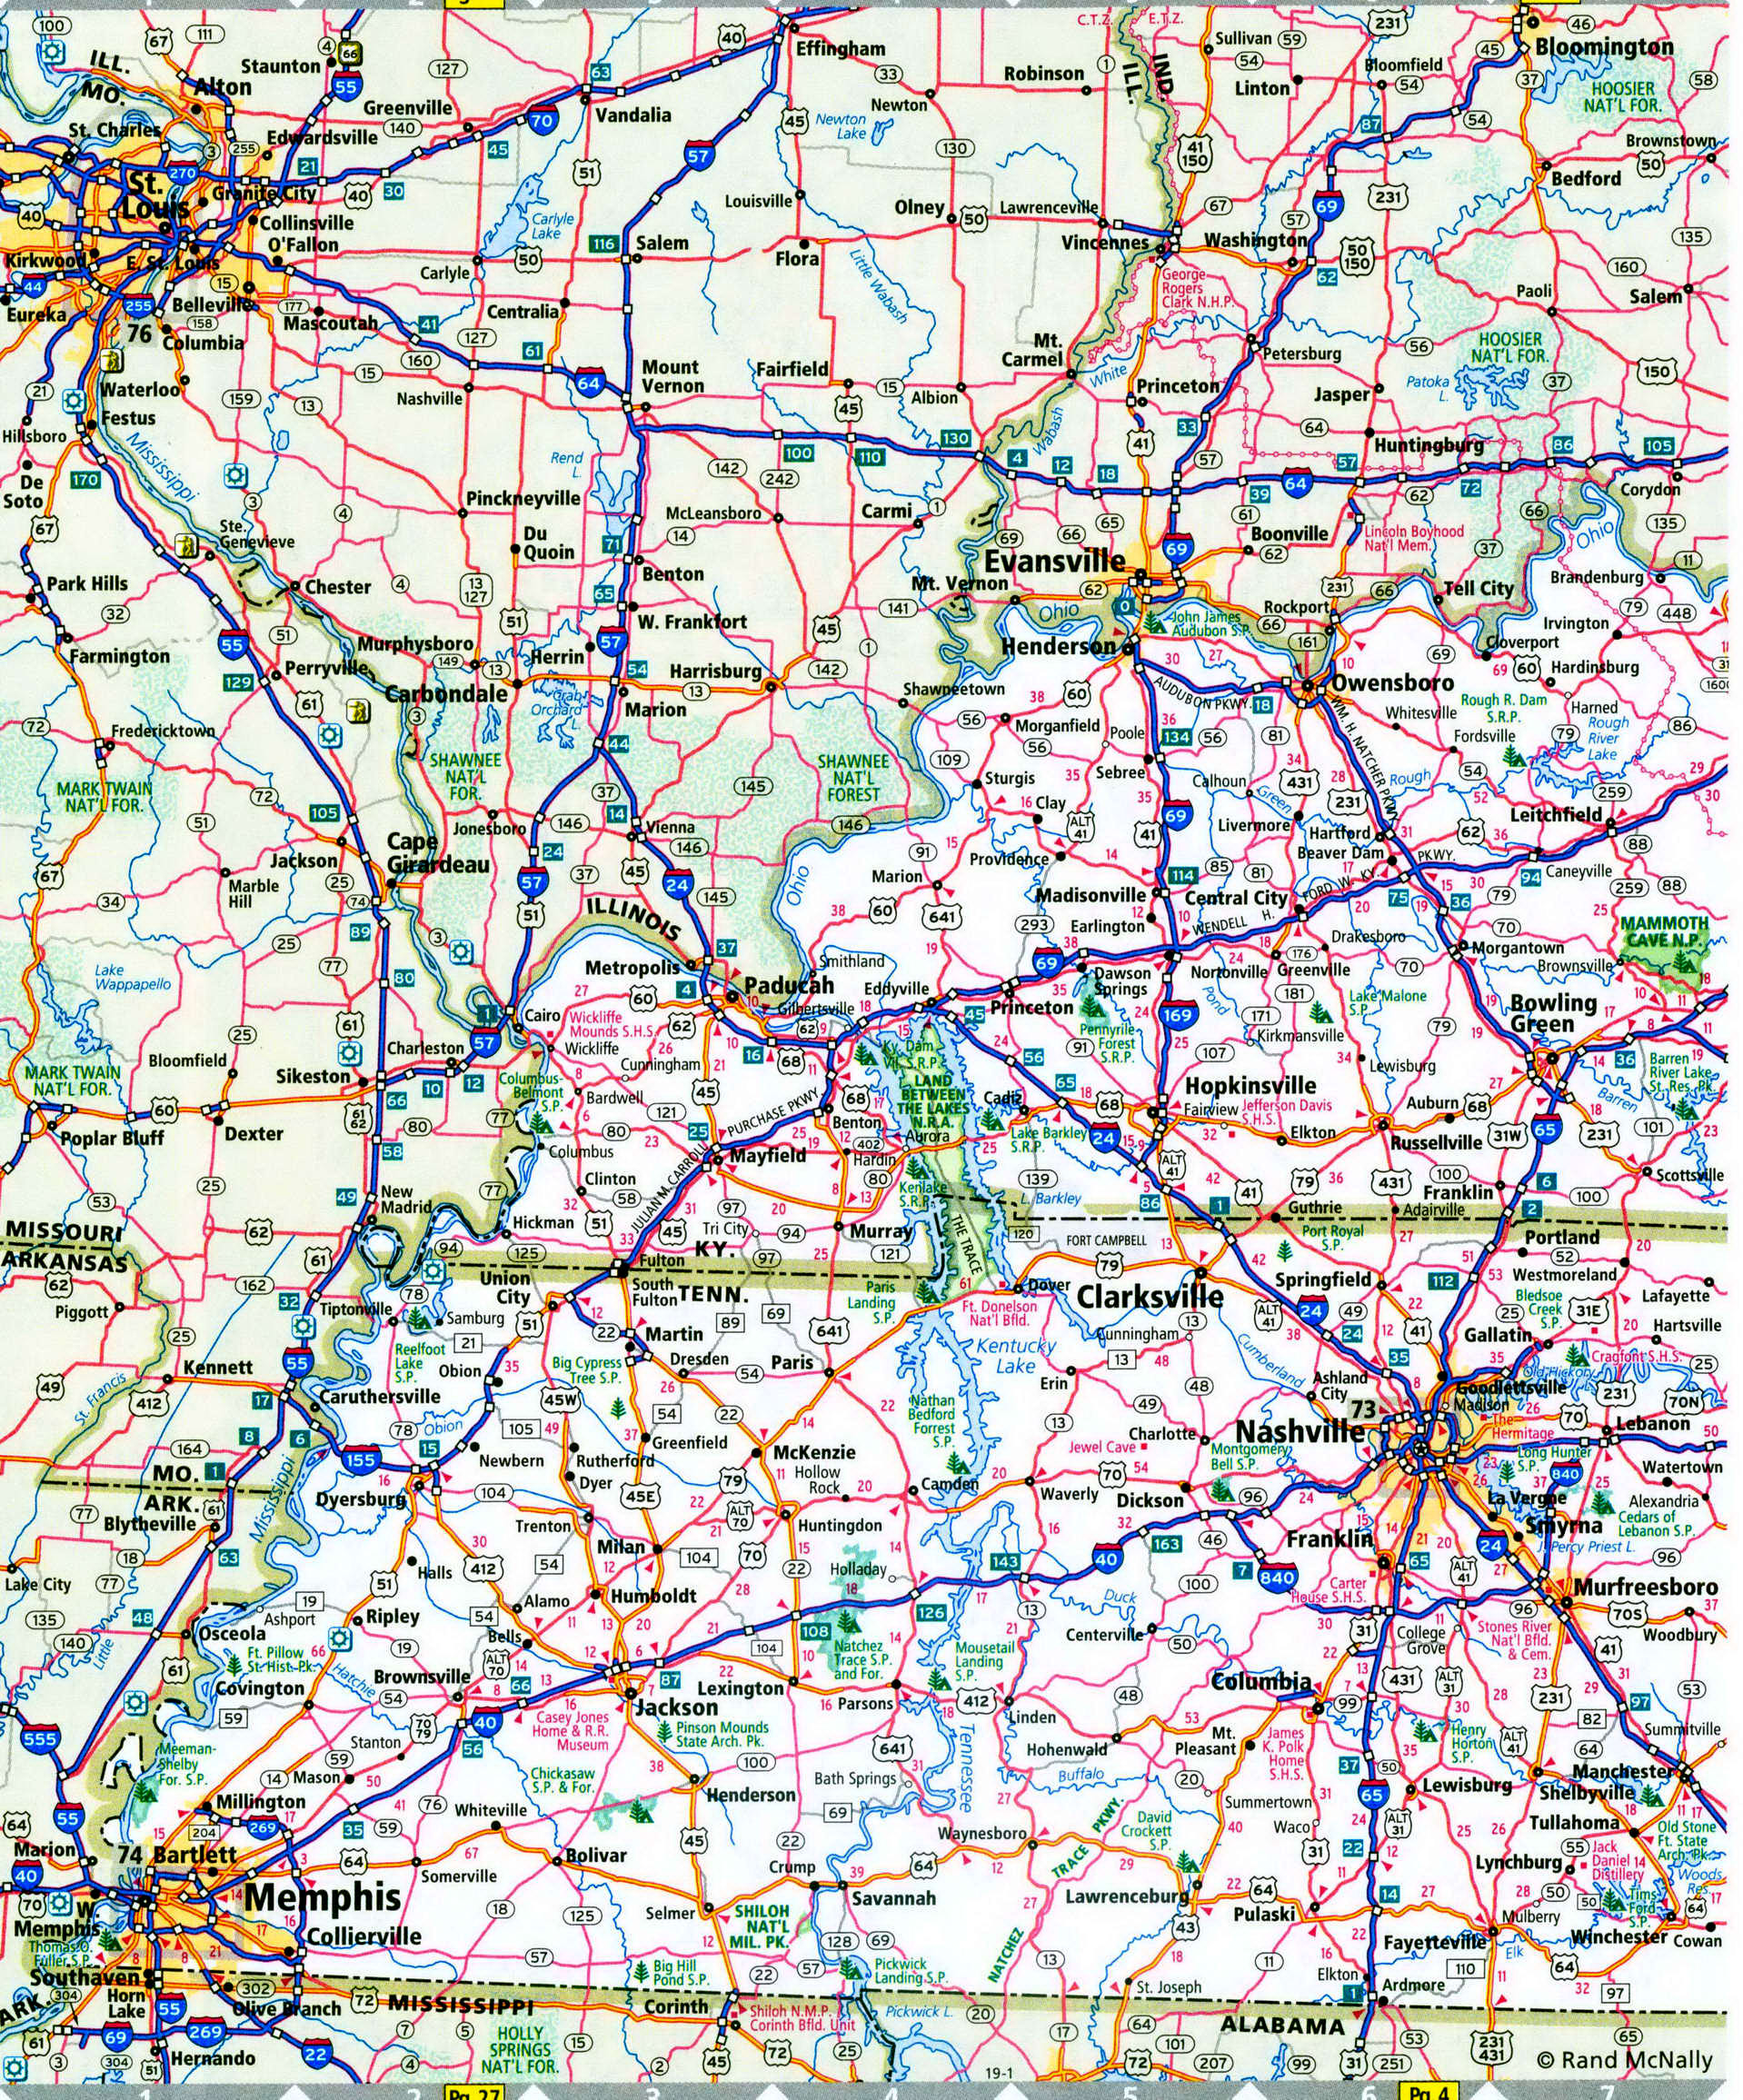 Tennessee and Kentucky interstate highways map